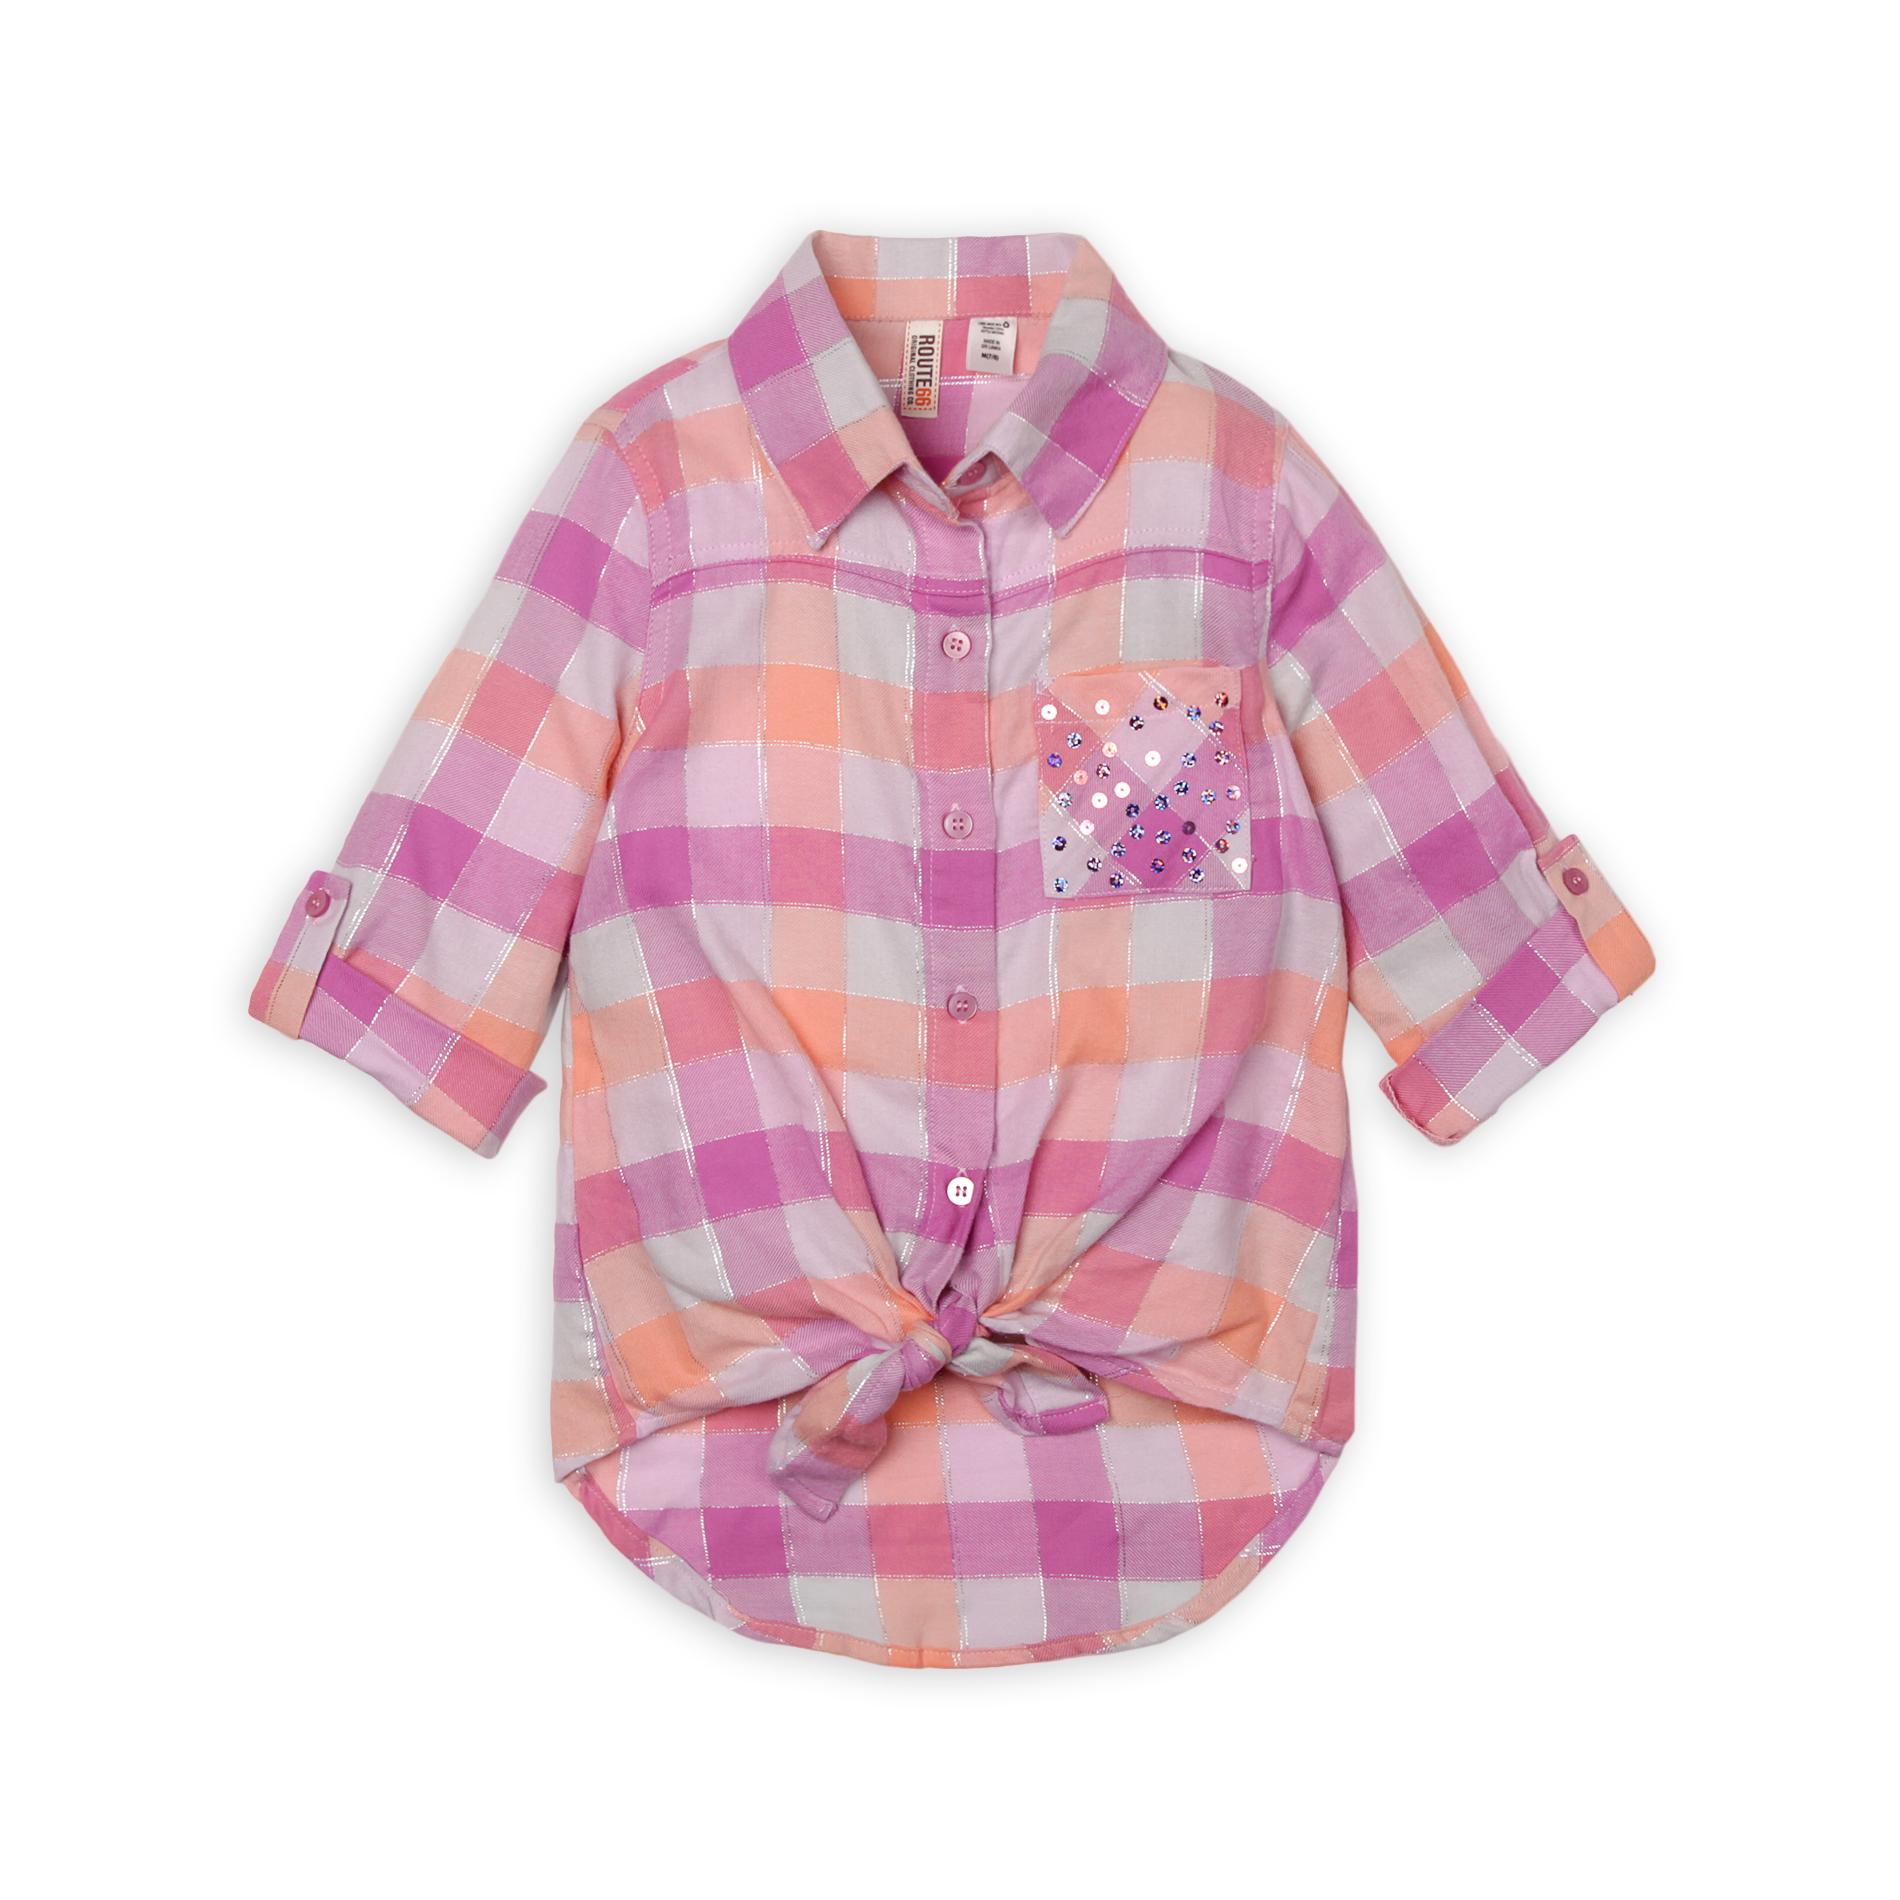 Route 66 Girl's Front-Tie Flannel Shirt - Plaid